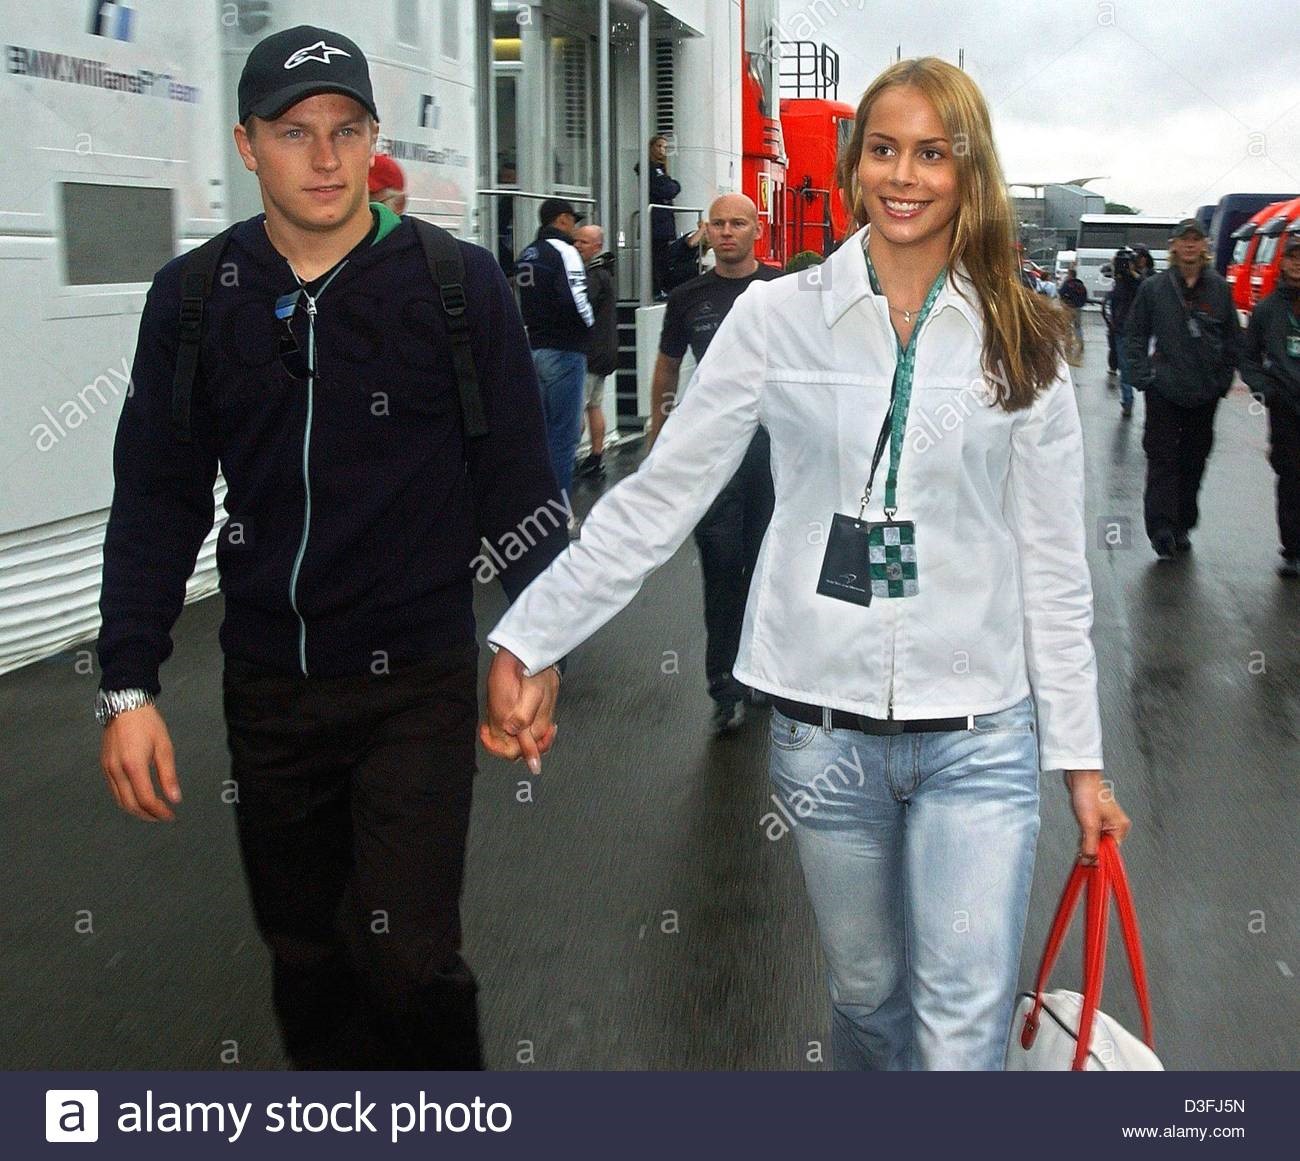 Finnish Formula 1 driver Kimi Raikkonen walks hand in hand with his girlfriend Jenny Dahlmann past the pit stops at the F1 racetrack in Silverstone, UK, 17 July 2003.